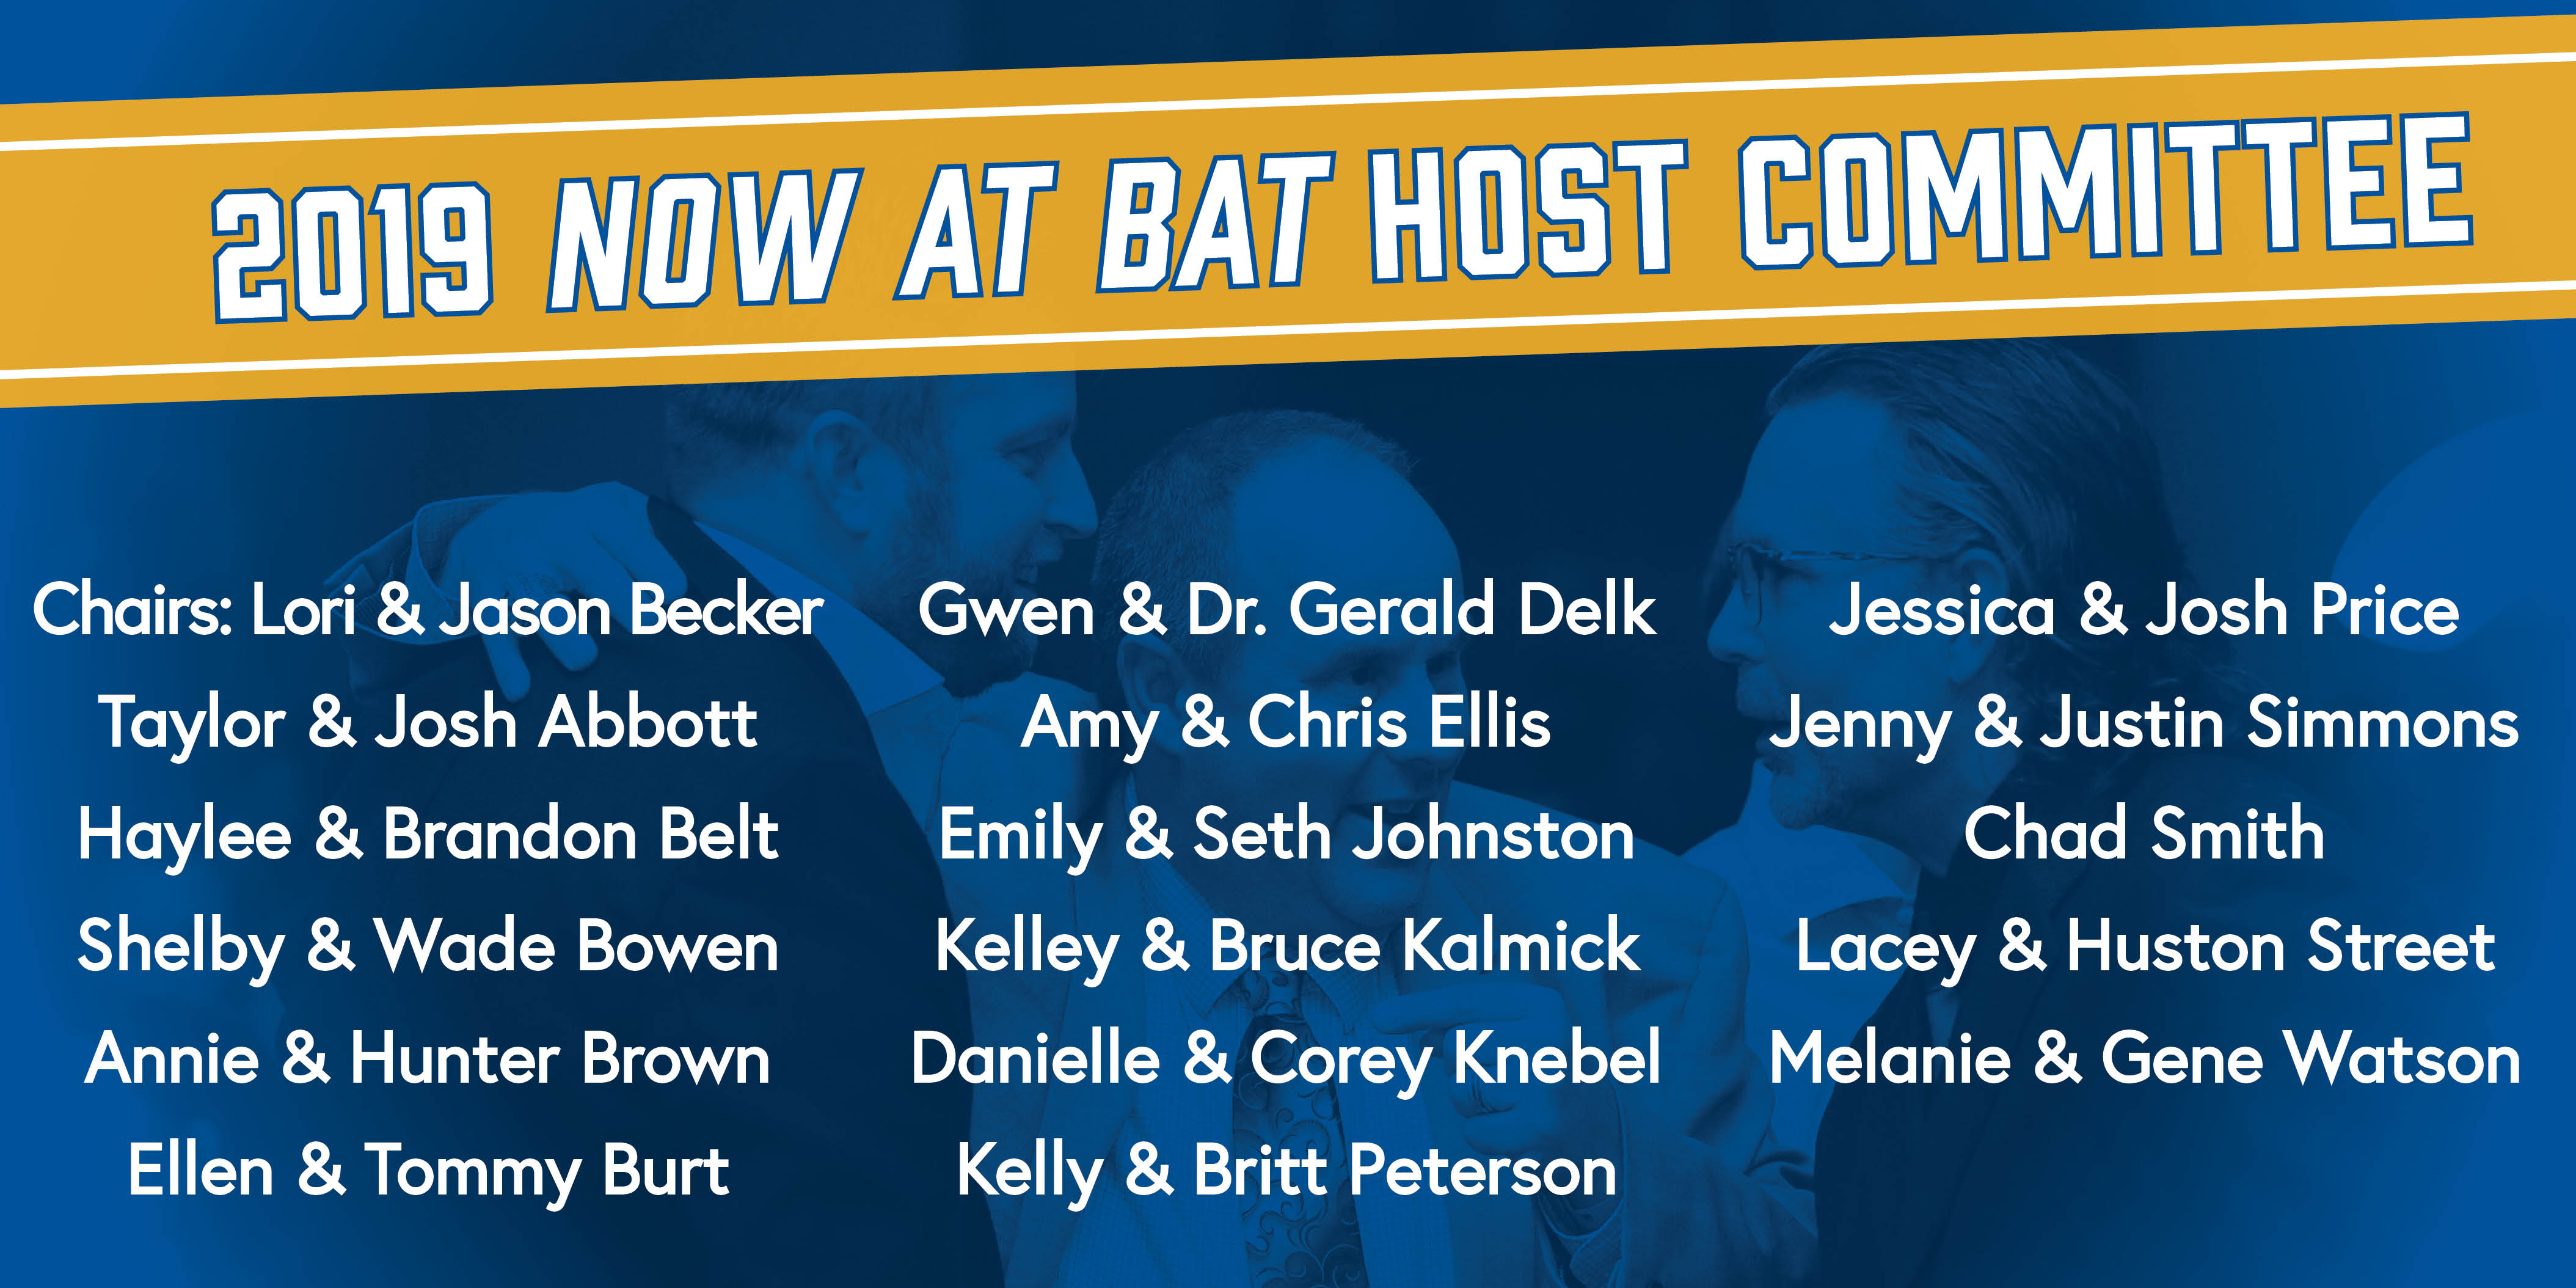 2019 Now at Bat Host Committee